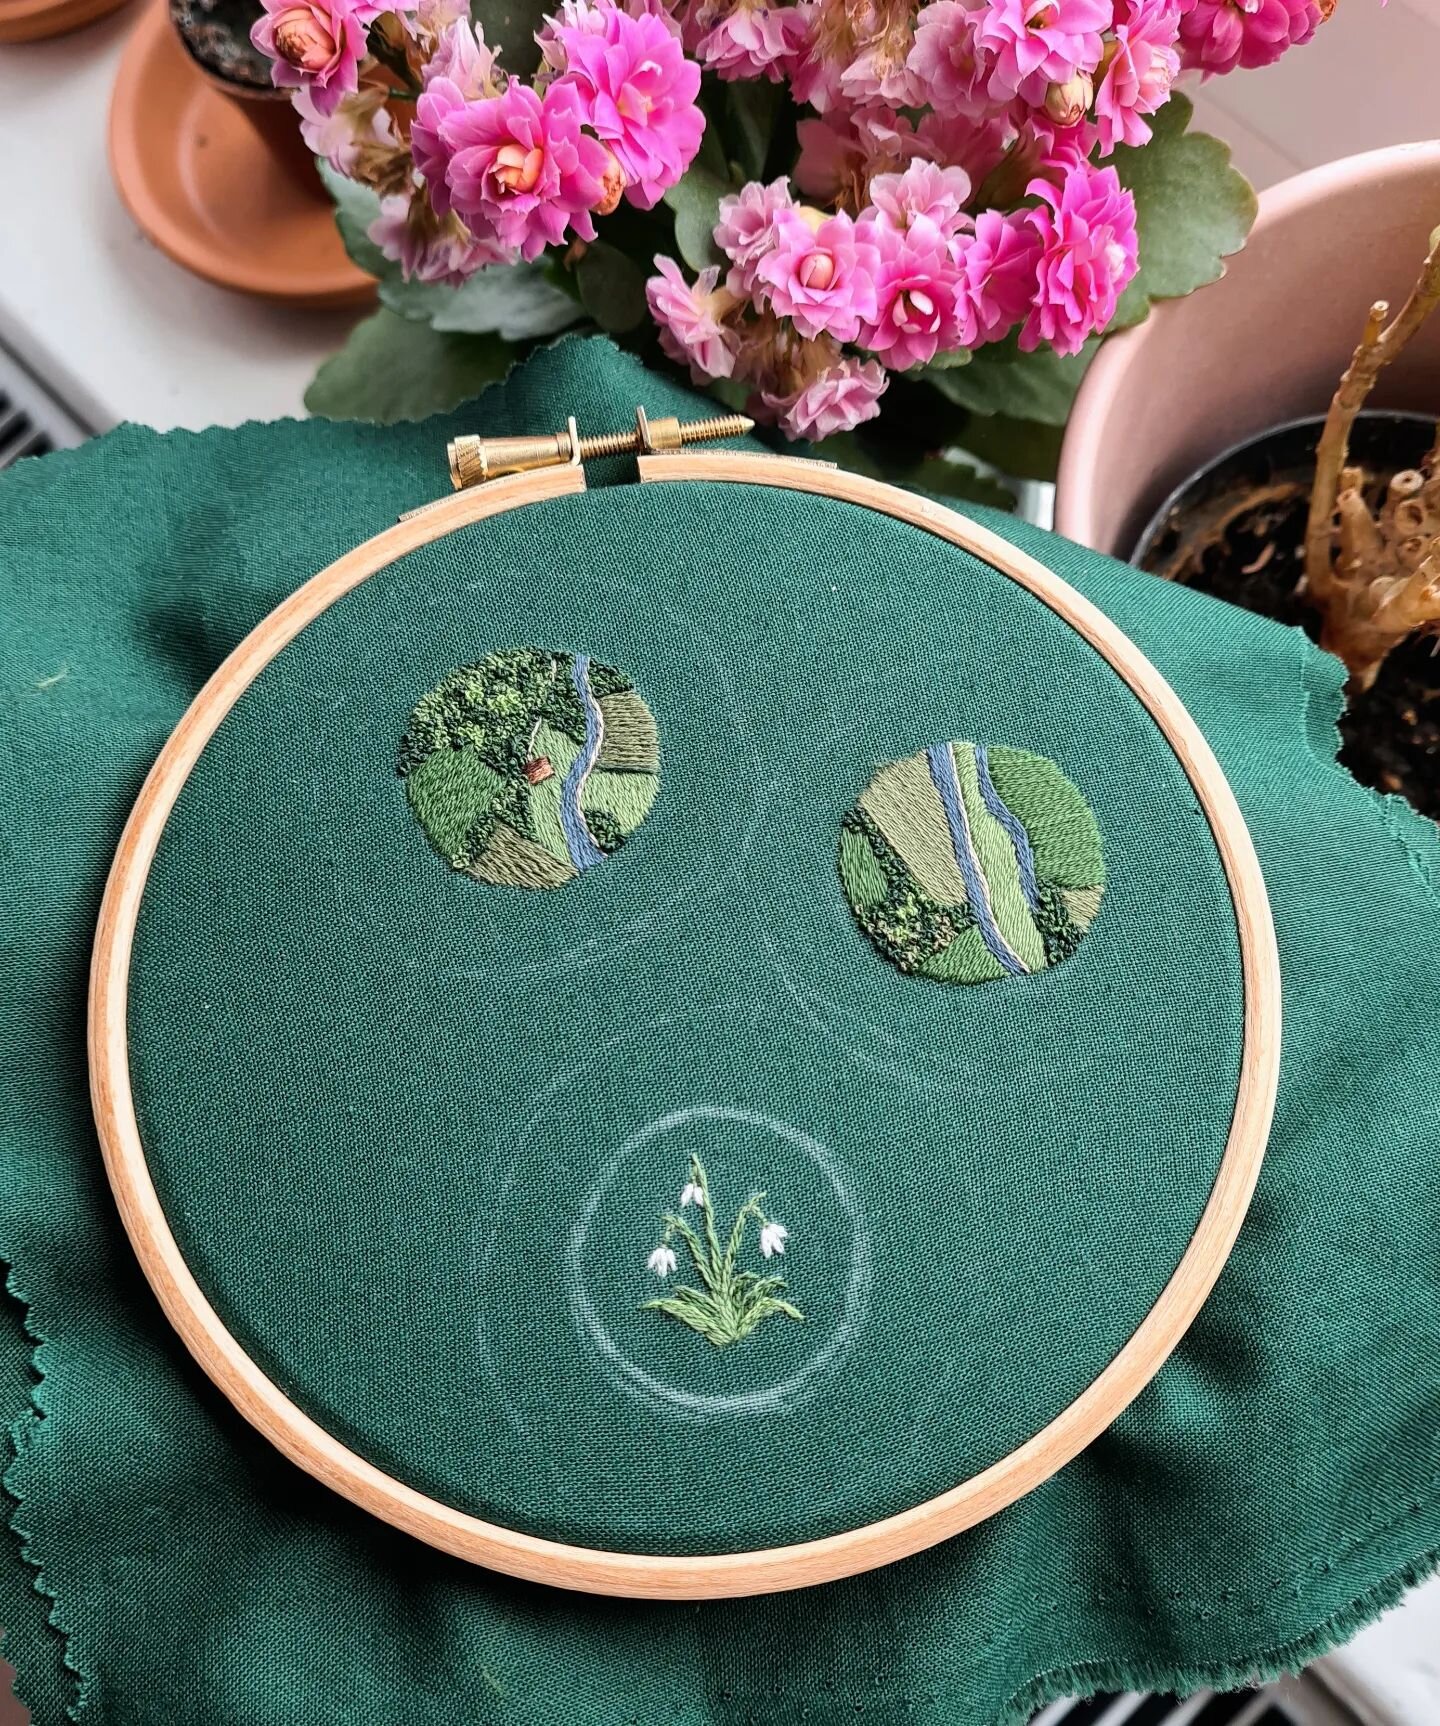 🎙 testing testing 👀
.
.
#aeriallandscapeembroidery #aerialembroidery #landscapeembroidery #embroidery #handmadewithlove #loveembroiderymag #dmcthreads #dmcembroidery #satinstitch #frenchknots #cottagecore #modernembroidery #countryside #cotswolds #